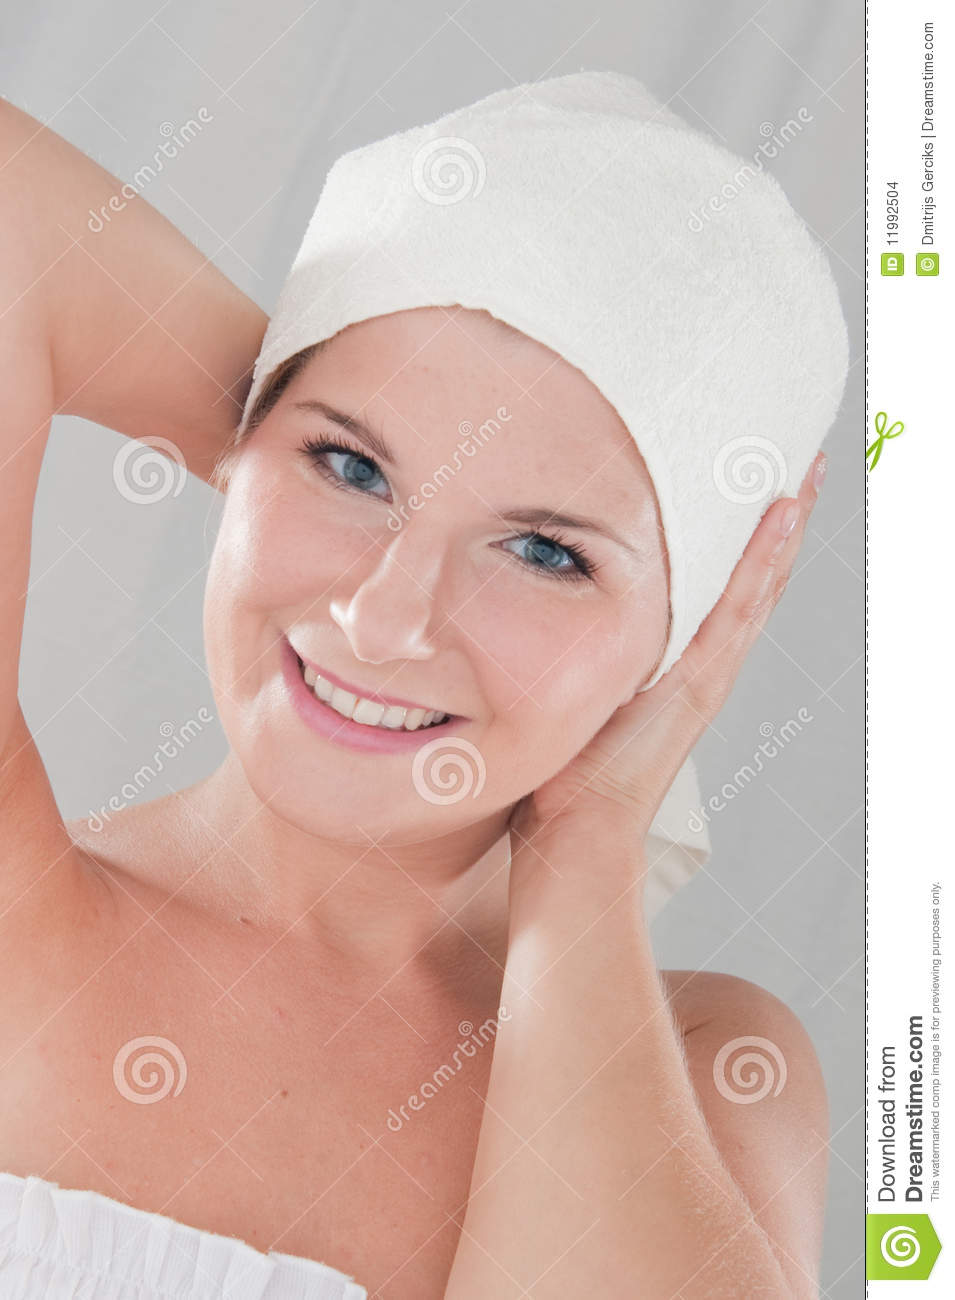 Young Beautiful Woman With Wet Hair In A Towel Stock Images   Image    